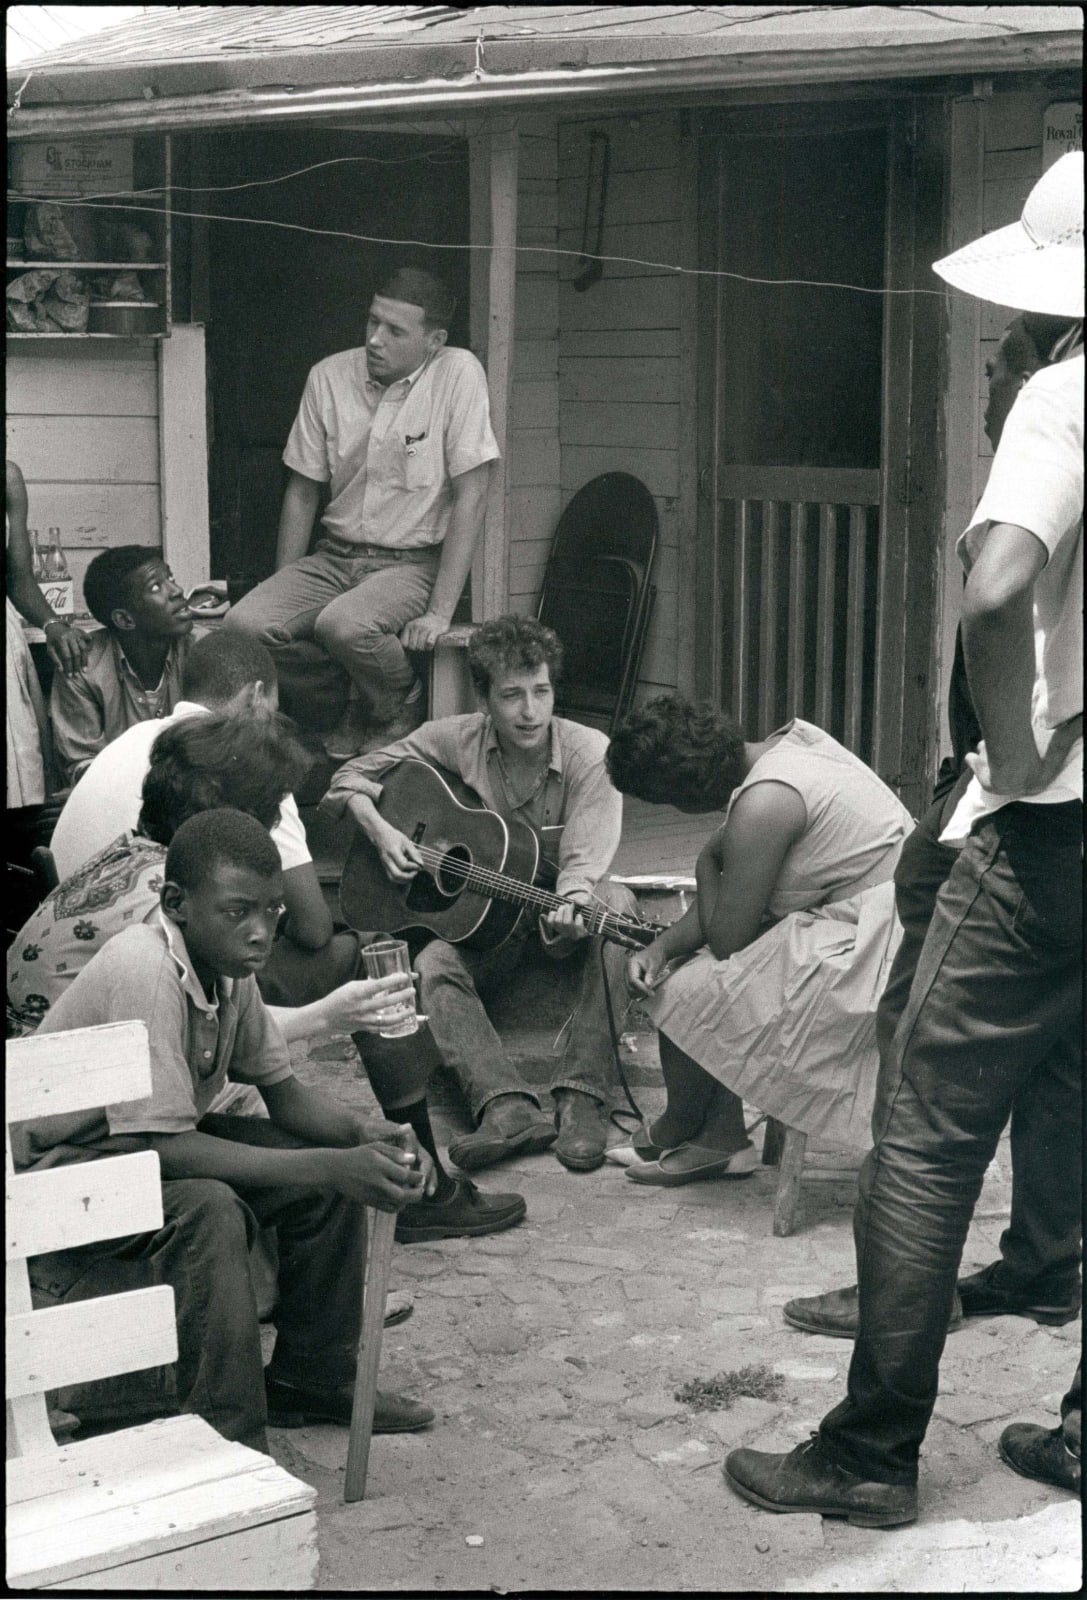 Danny Lyon, Bob Dylan behind the SNCC office, Greenwood, Mississippi